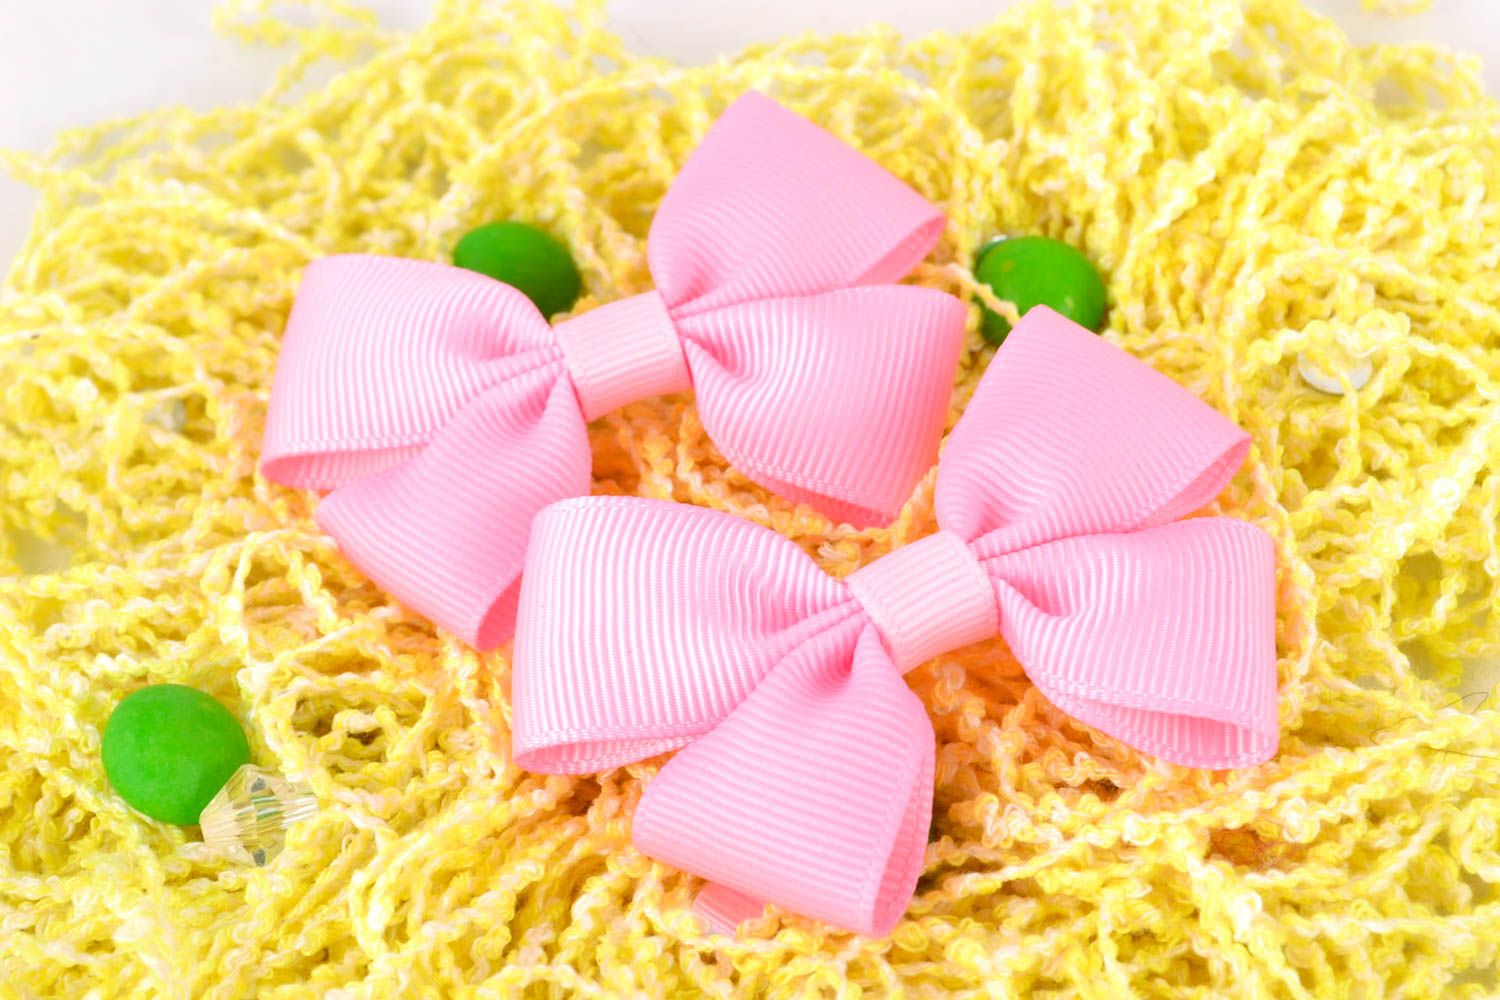 Unusual handmade textile bows hair bow brooch jewelry jewelry making supplies photo 1